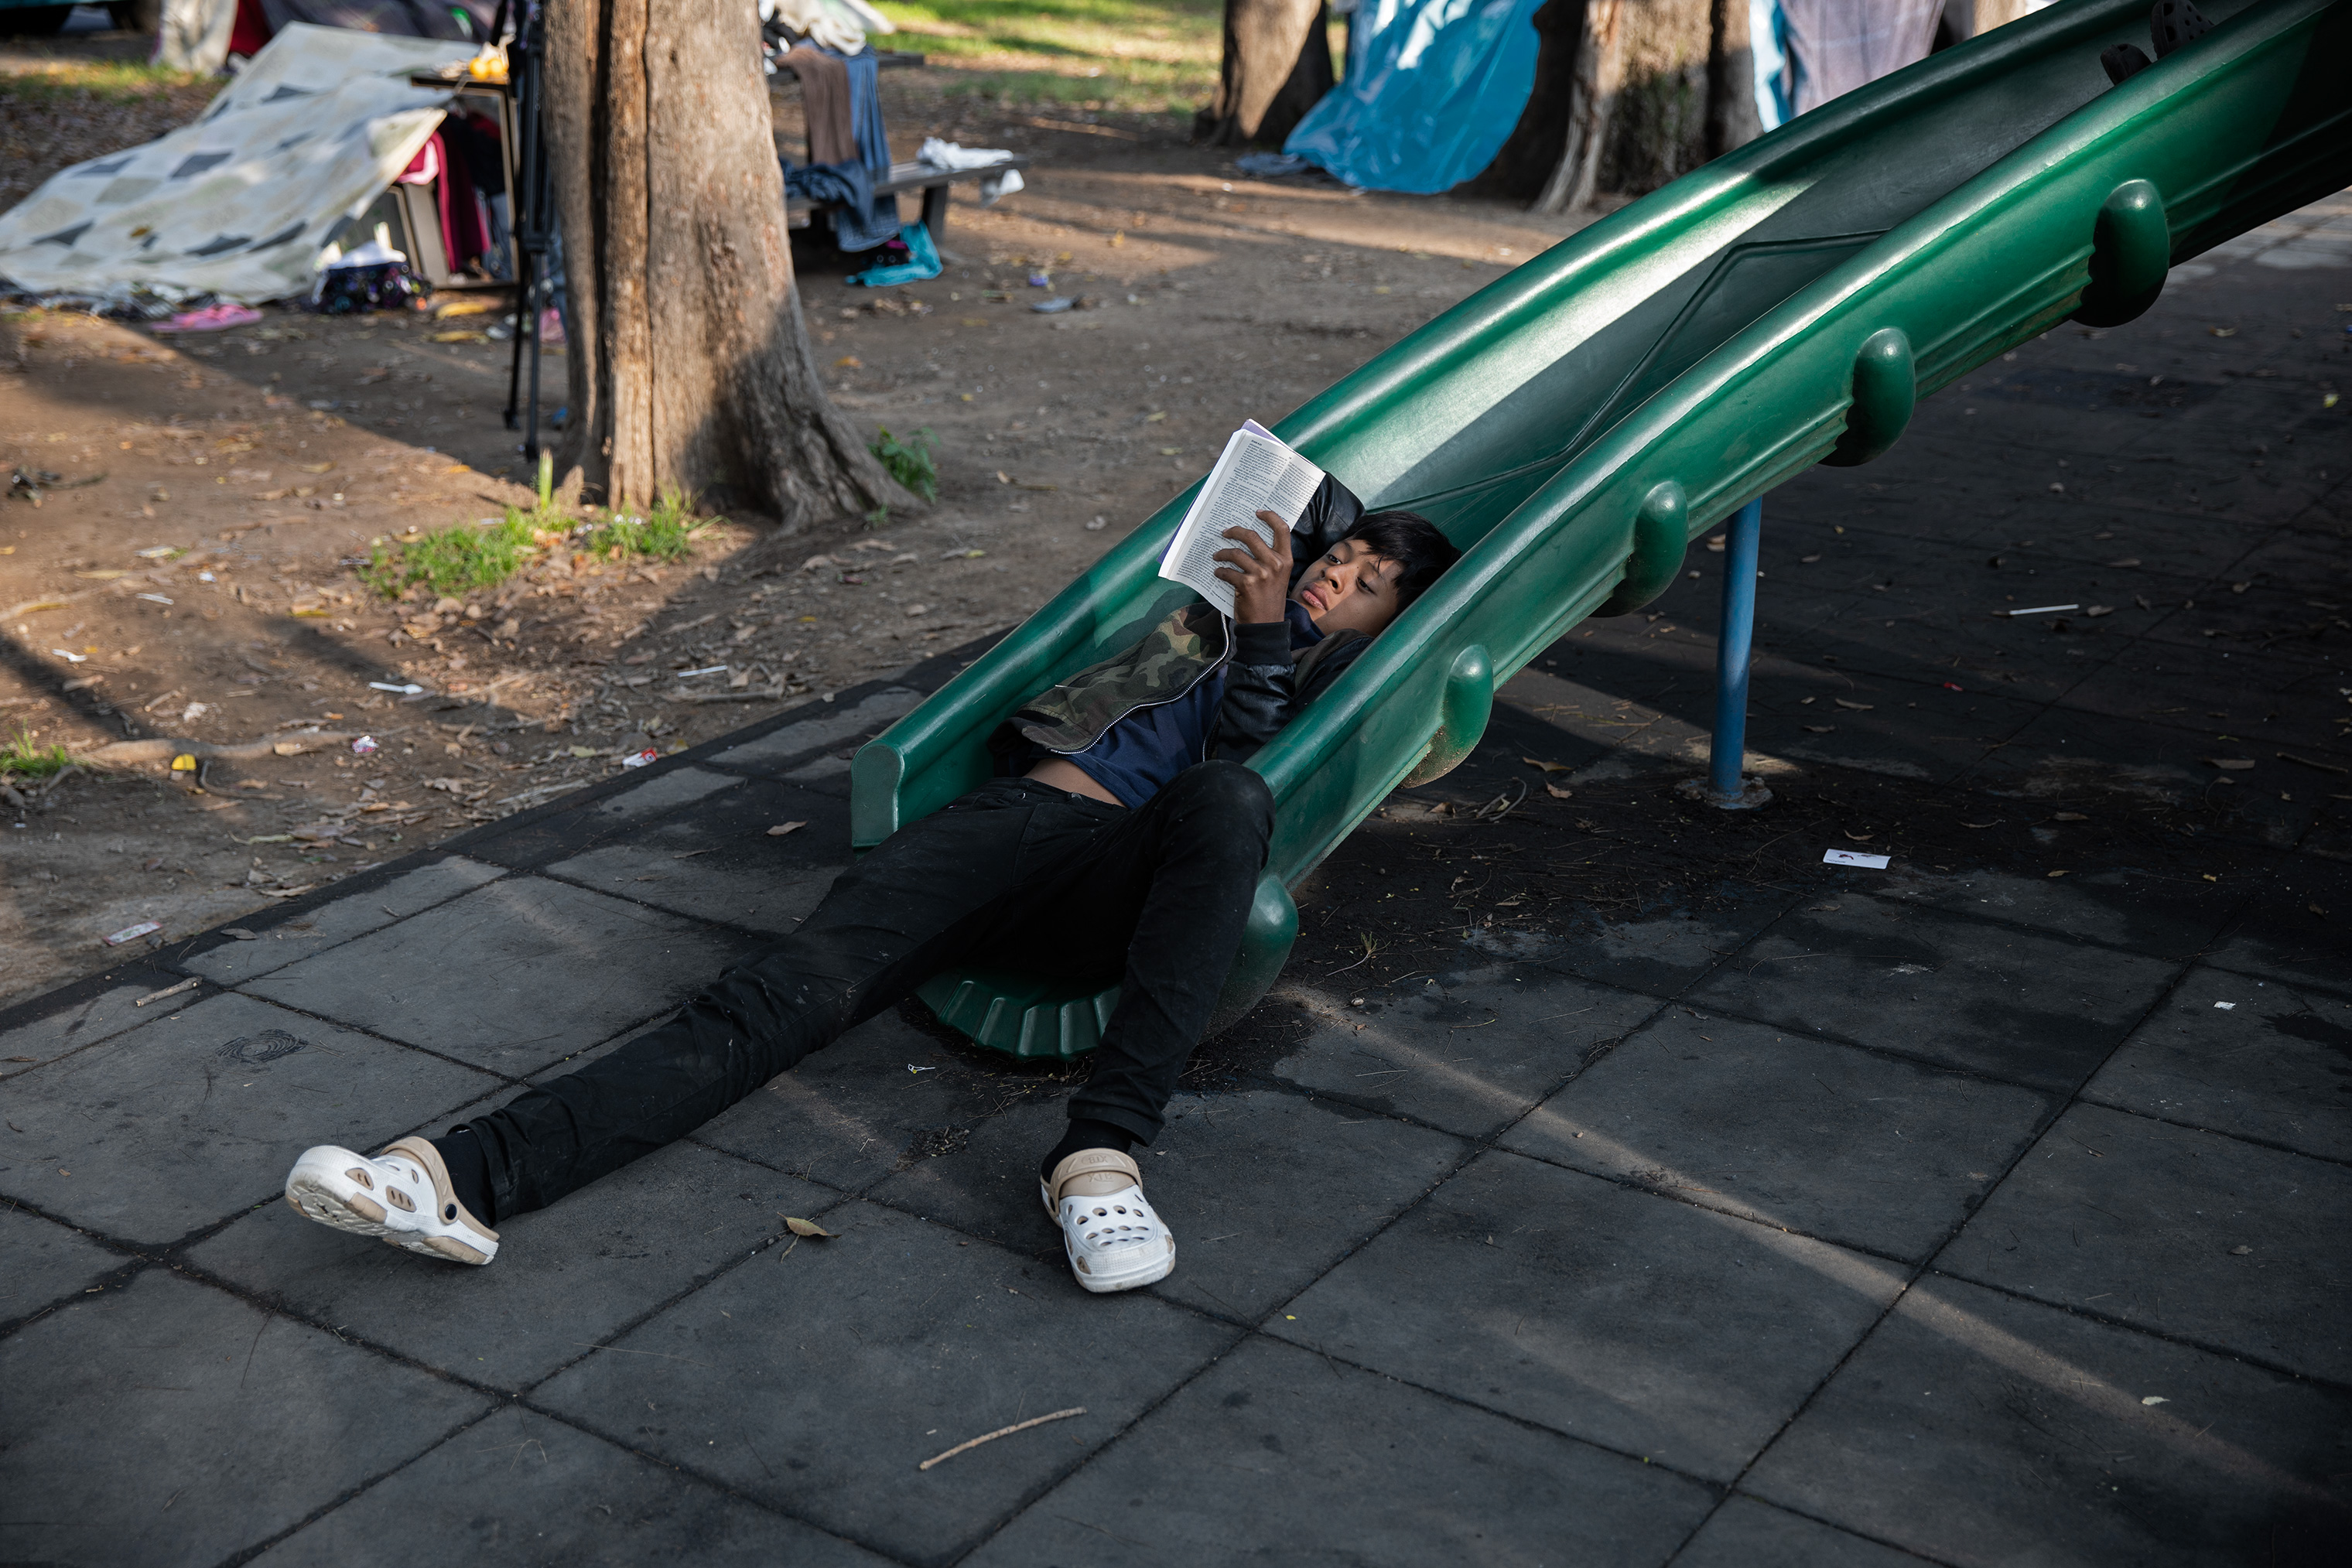 The Jesus Martinez stadium in Mexico City includes several playgrounds where some of the 2,300 minors from the caravan played, rested and read books, Nov. 7, 2018. (Jerome Sessini—Magnum Photos for TIME)